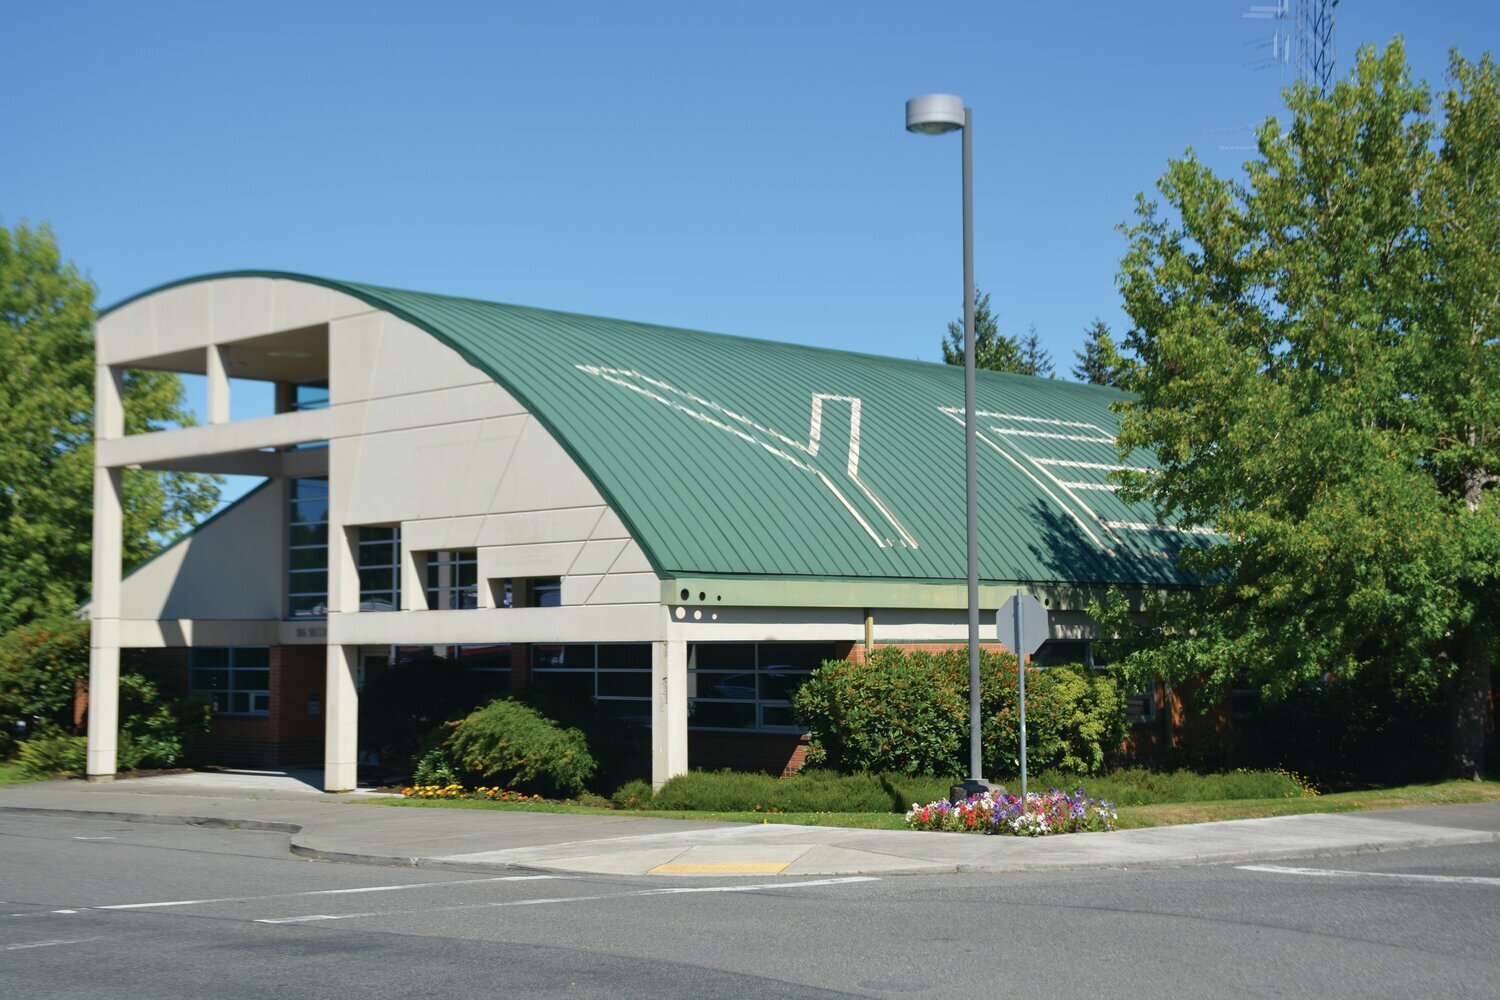 Yelm City Hall can be found at 106 2nd St. SE.